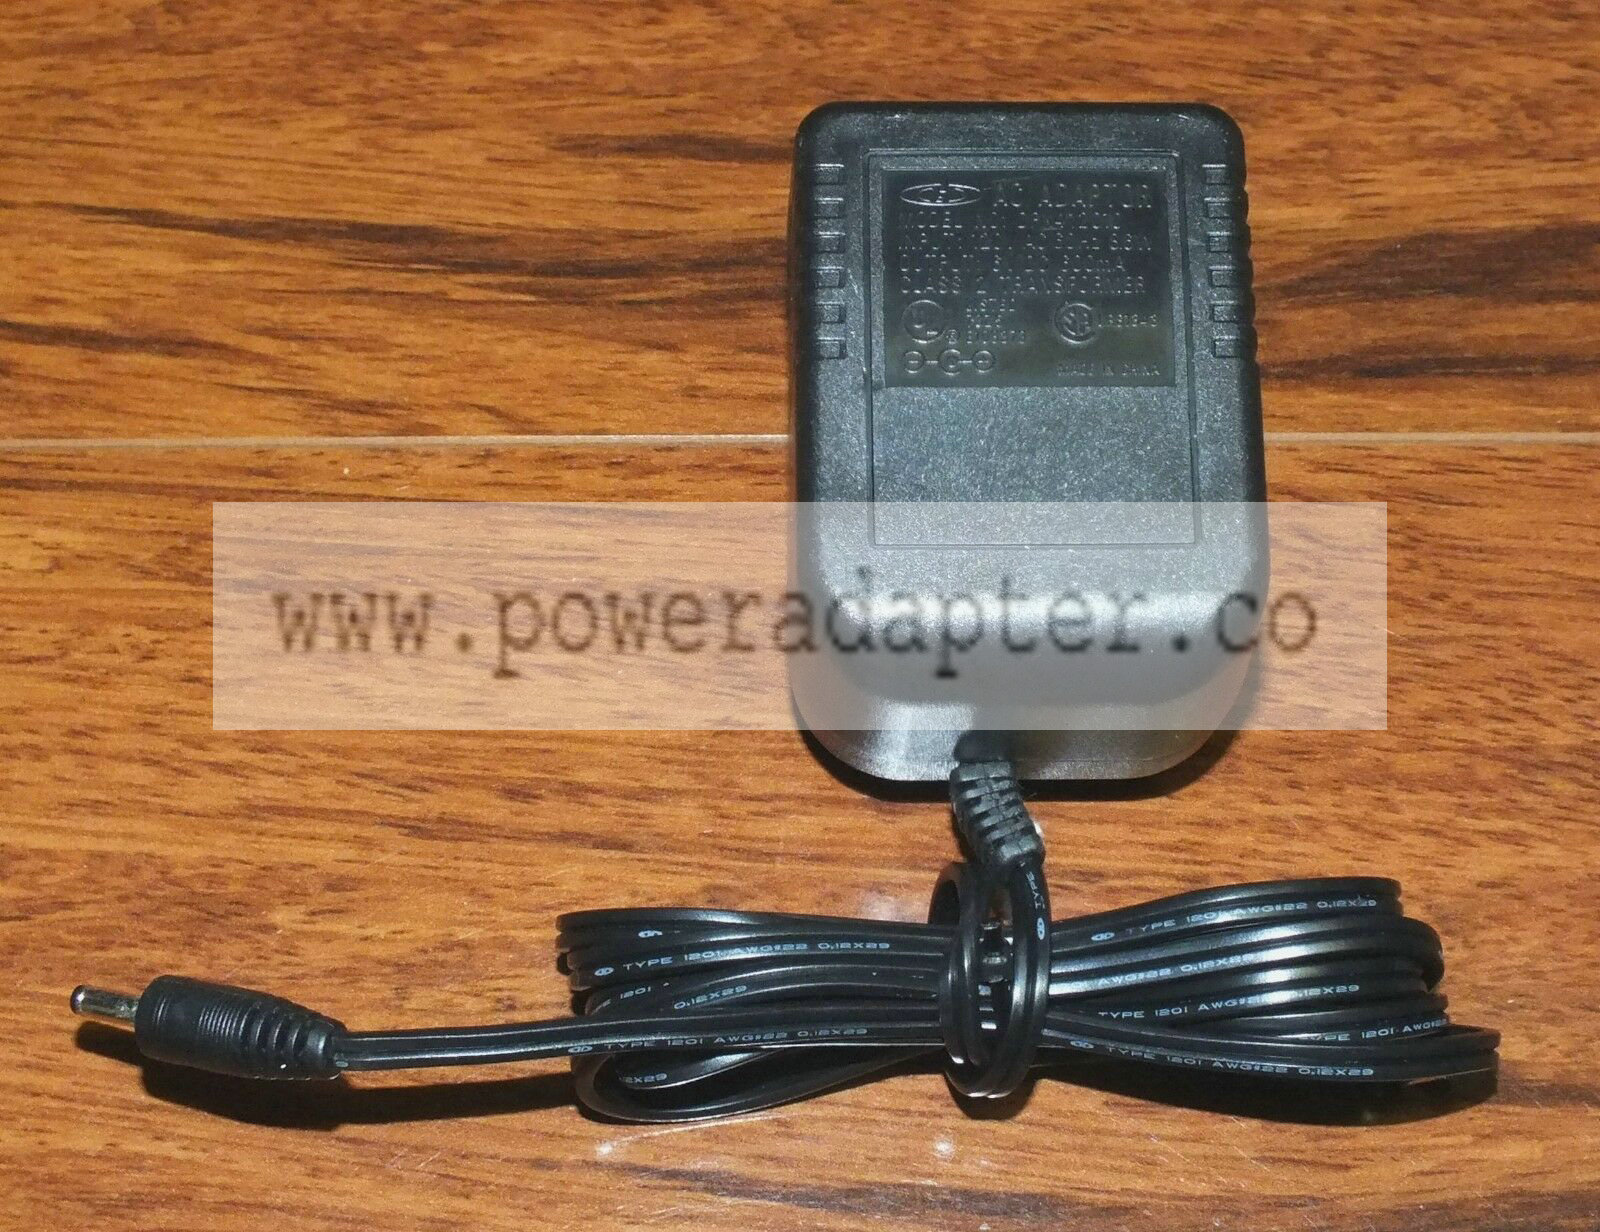 Genuine CHD AC Adaptor (DPX412010) Class 2 Transformer Output: 6VDC 600mA Type: AC to DC Brand: See Pictures Model: - Click Image to Close